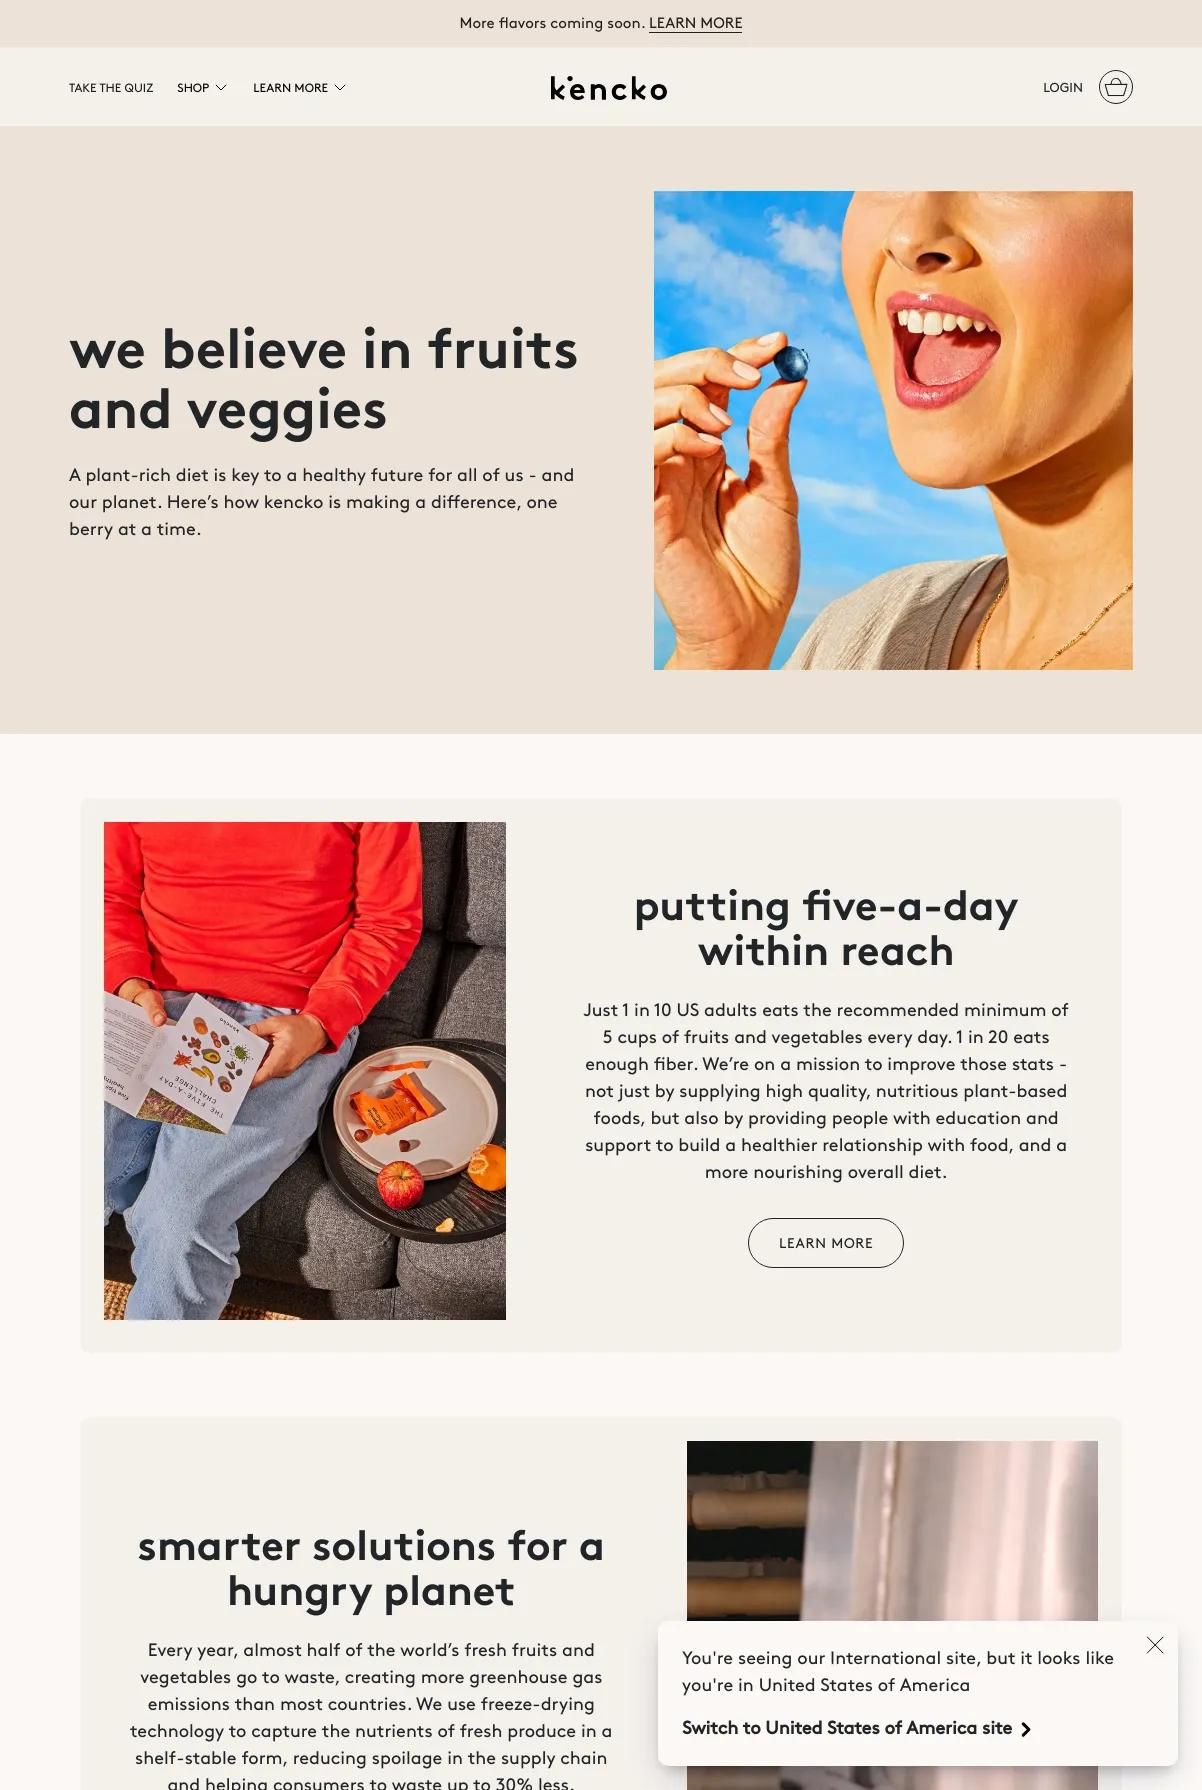 Screenshot 3 of Kencko (Example Shopify Food and Beverage Website)